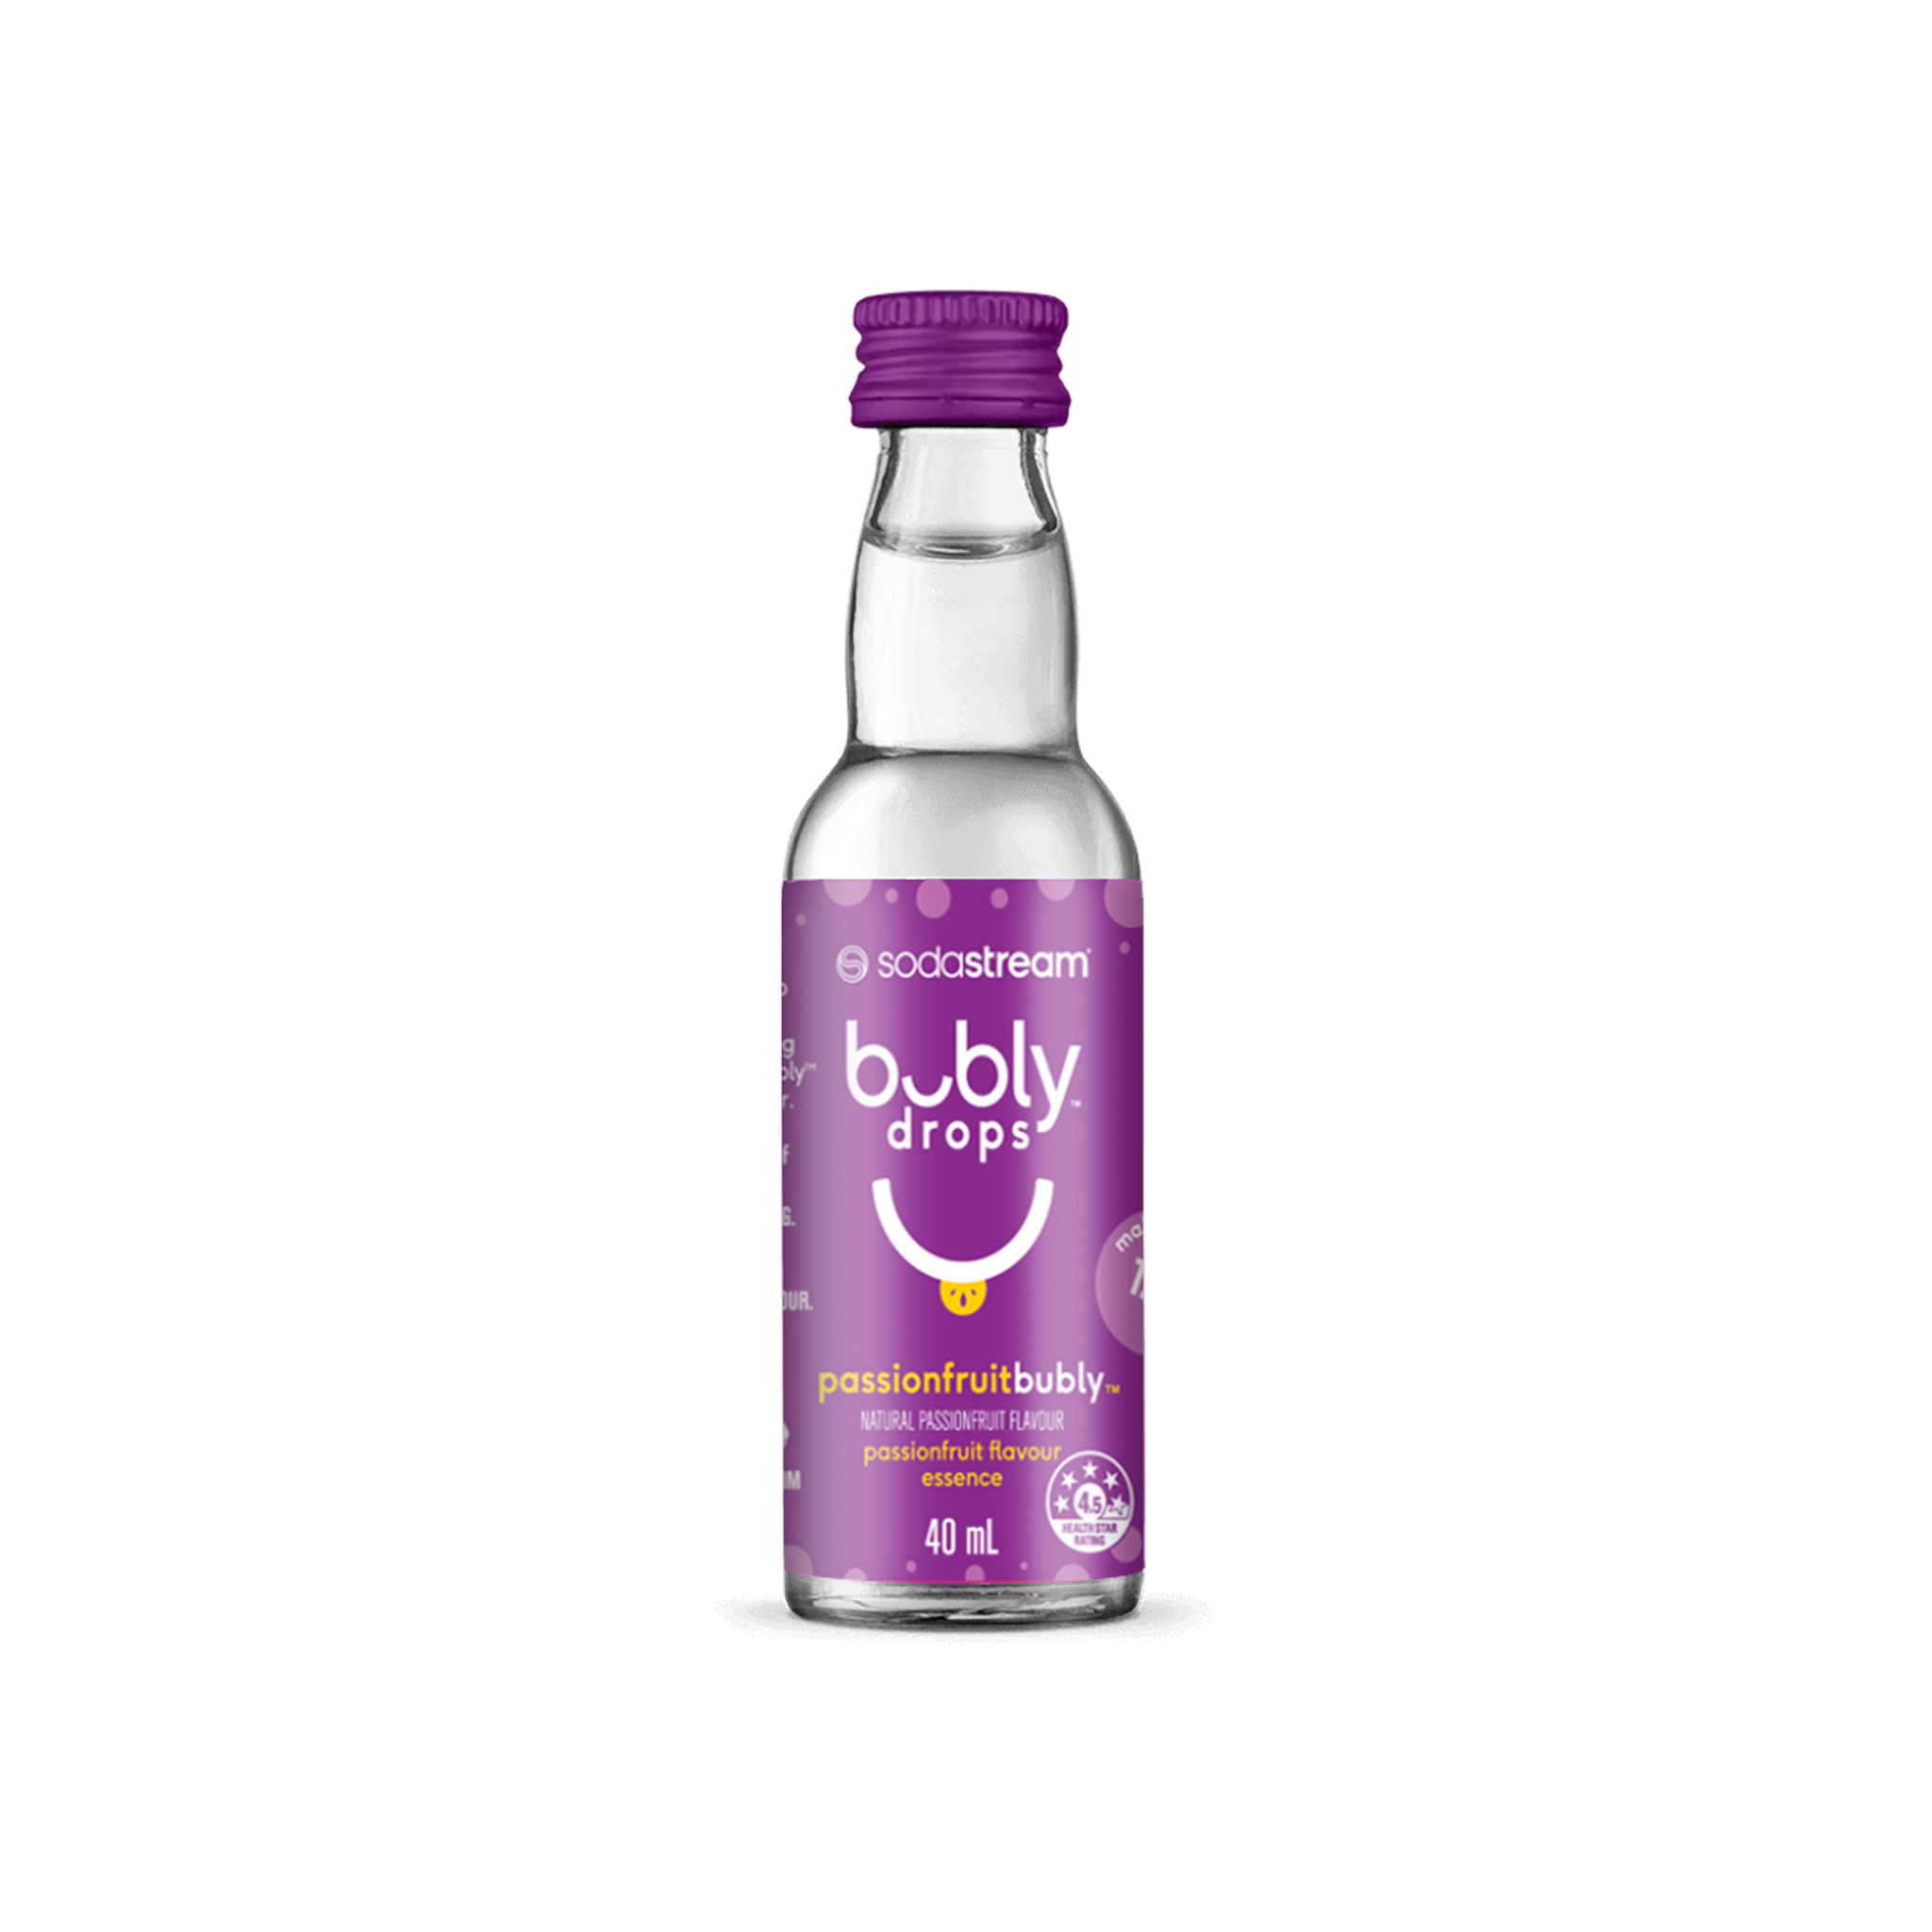 passionfruit bubly drops™ sodastream